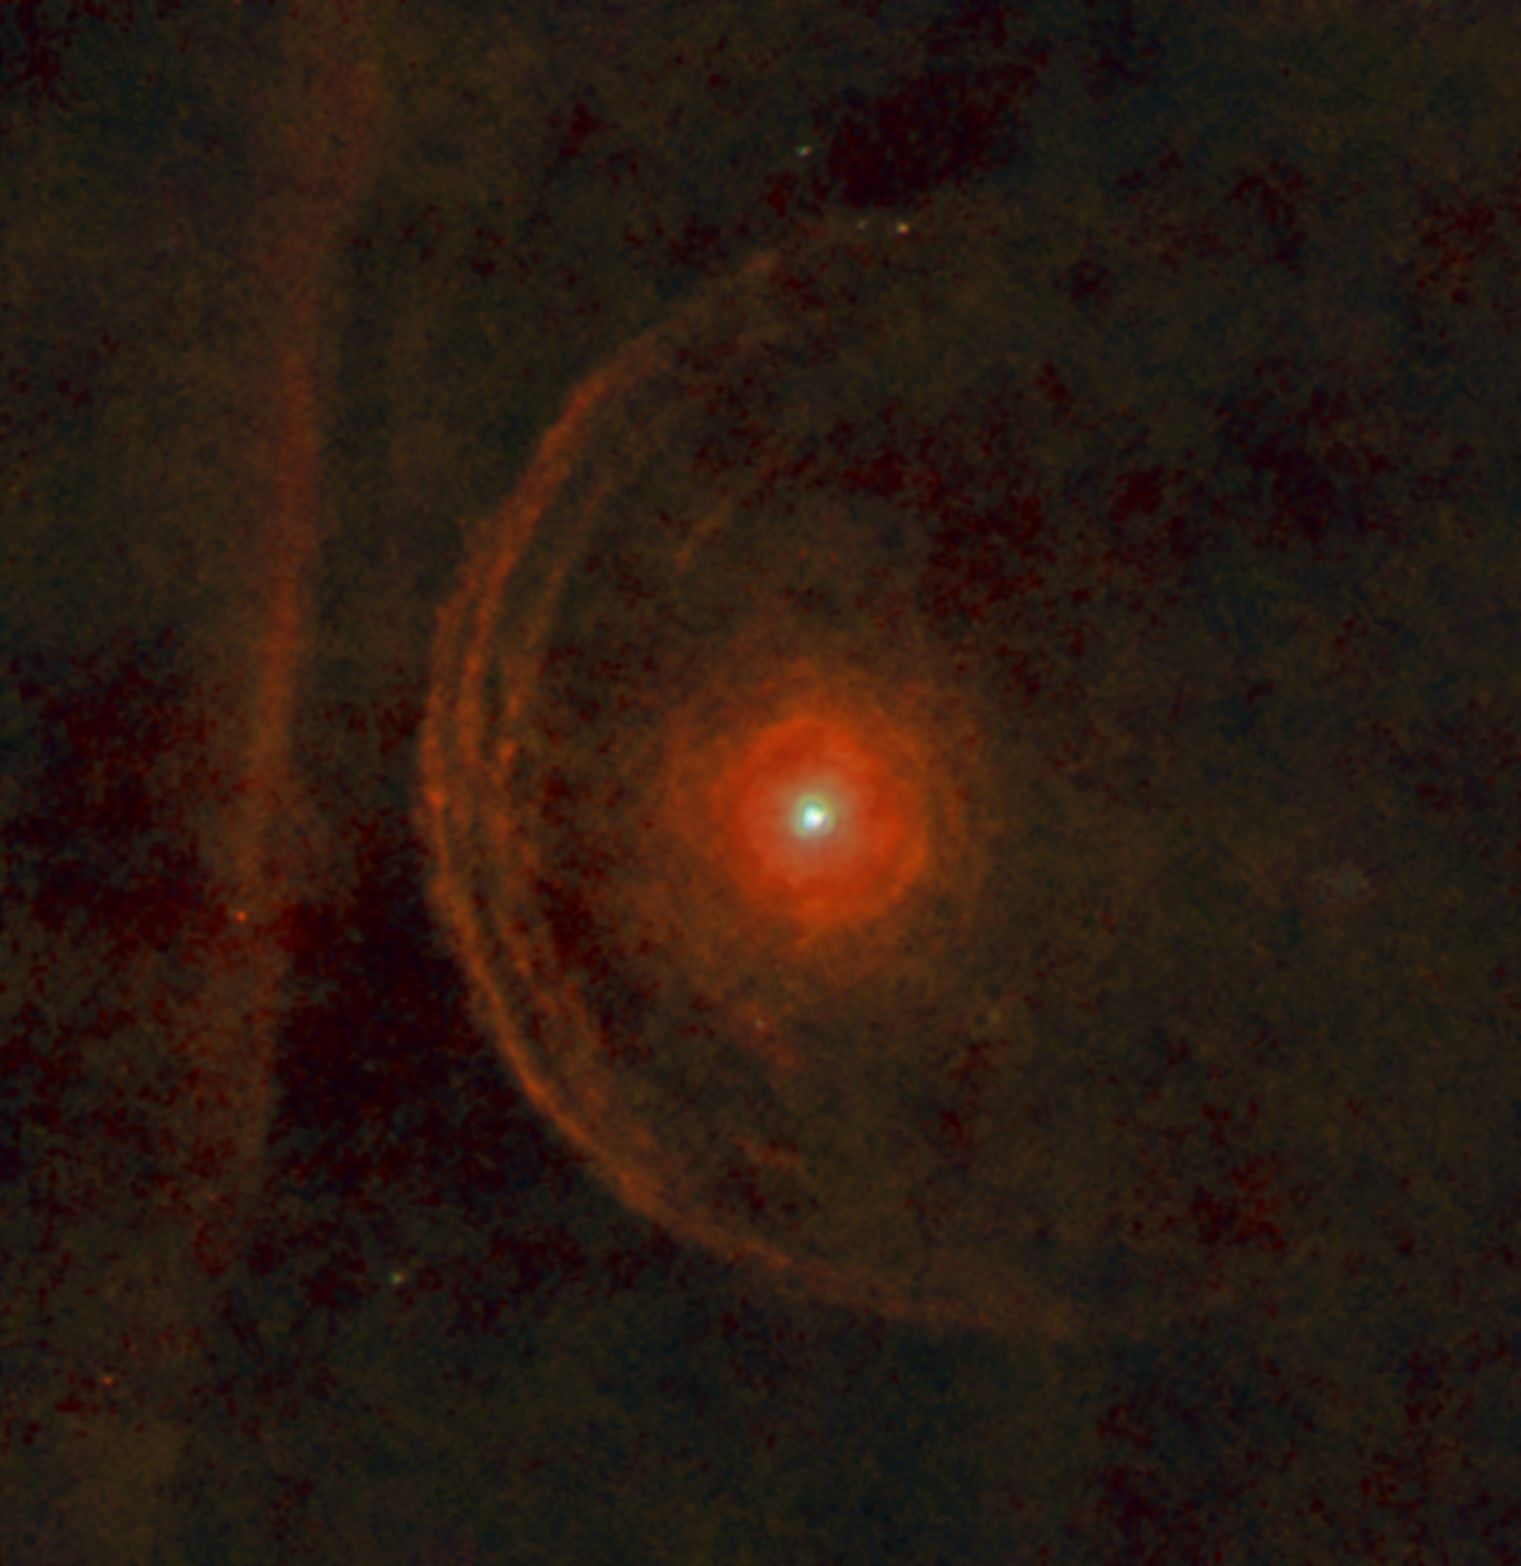 An RGB image of Betelgeuse and its environment constructed from PACS images at 70, 100 and 160 microns. North is to the top left and east to the bottom left in this view. A series of arcs can be see to the left (northeast) of the star; these are shells of material shed by the star in its supergiant phase. An intriguing feature of this image is the vertical bar to the left, which it is hypothesised may be the edge of an interstellar cloud that is being illuminated by the star; if so, the outer shell will collide with it in approximately 5000 years.